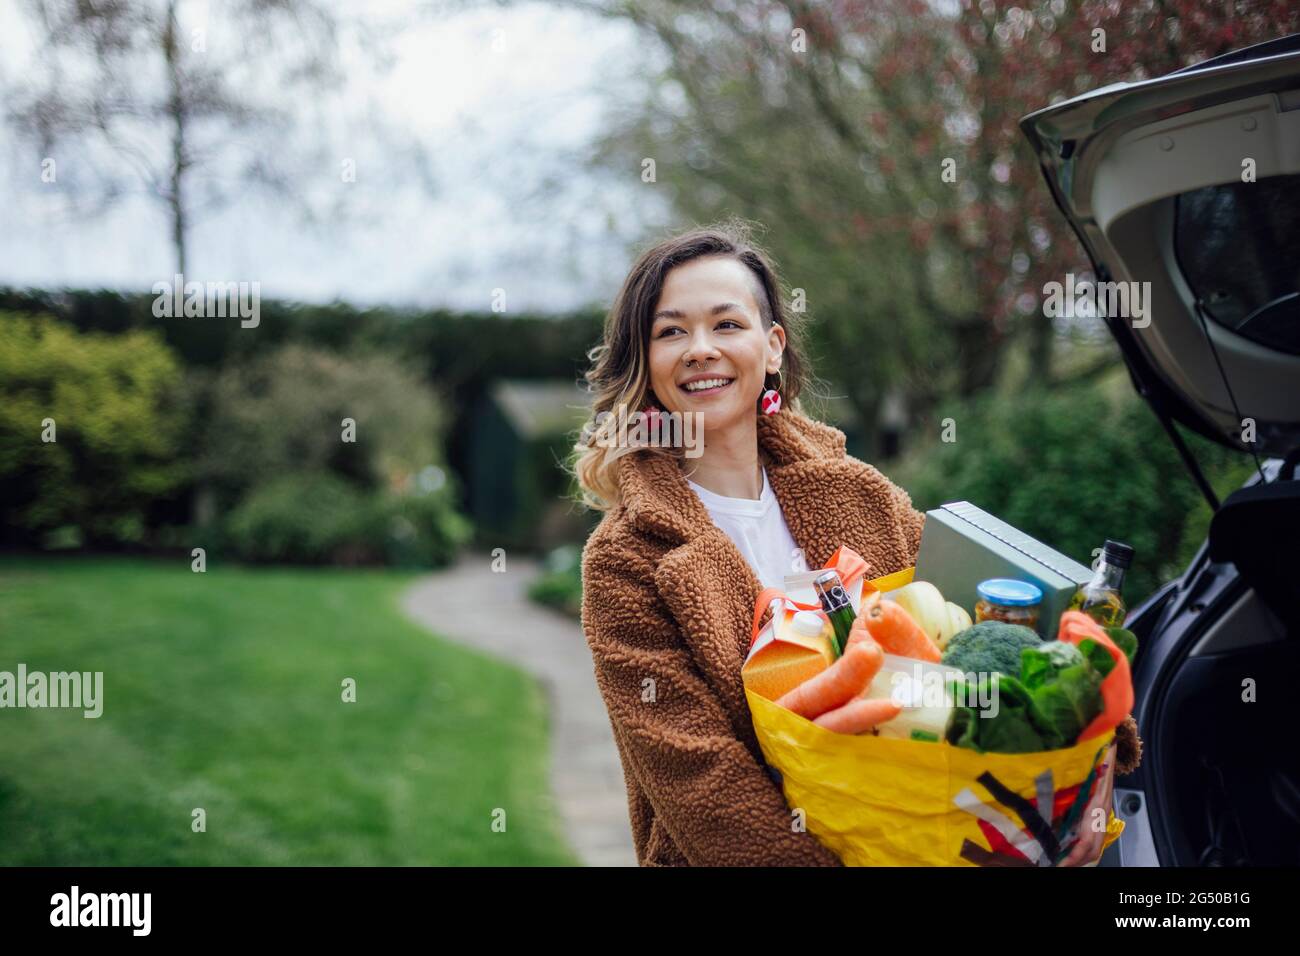 A young woman smiling, looking away from the camera and holding a reusable carrier bag filled with groceries. She is unloading the car. Stock Photo